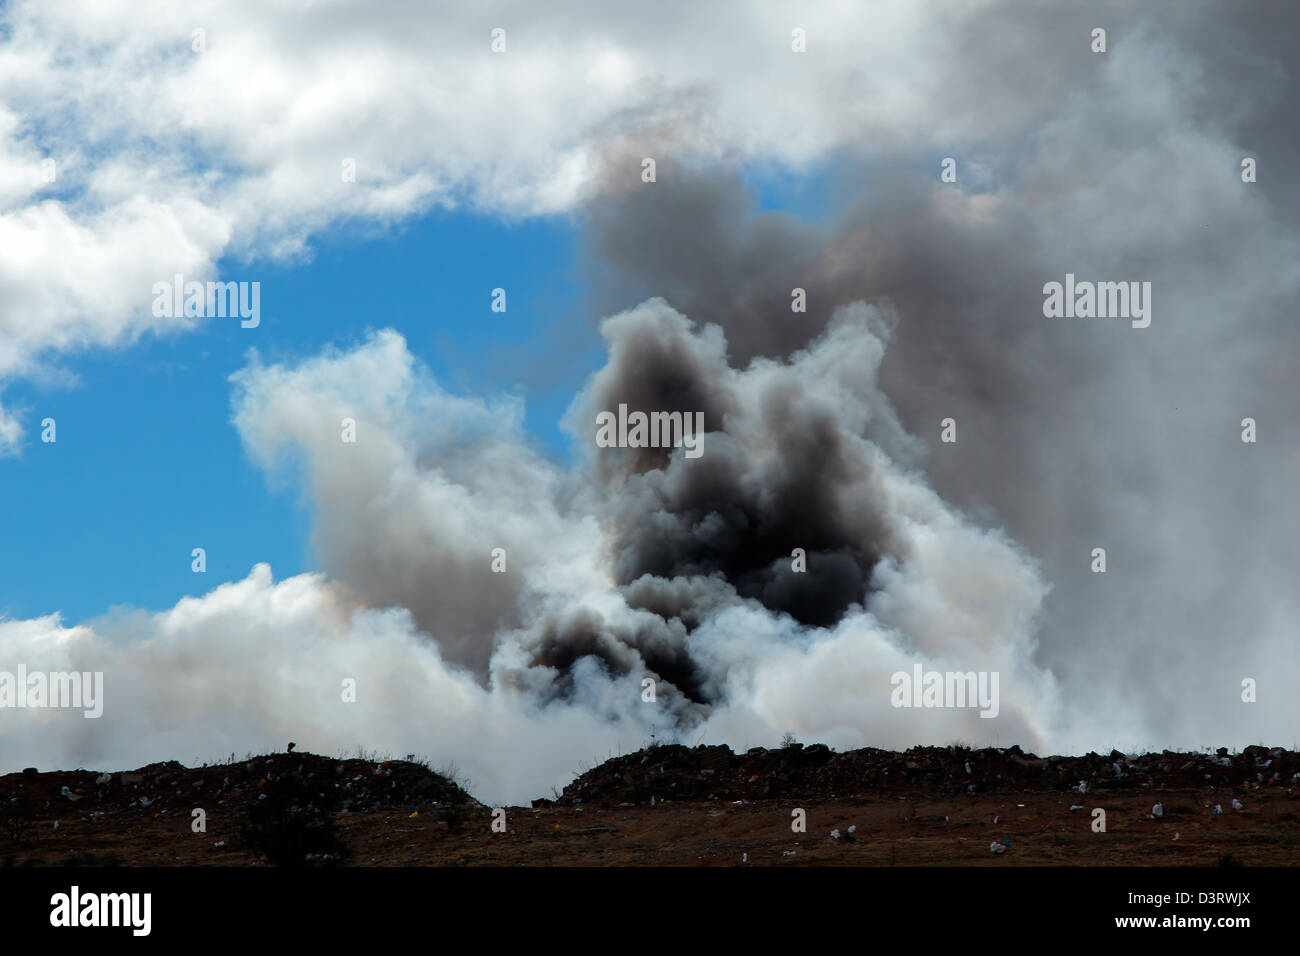 Billowing smoke and pollution from burning waste as a waste disposal site Stock Photo